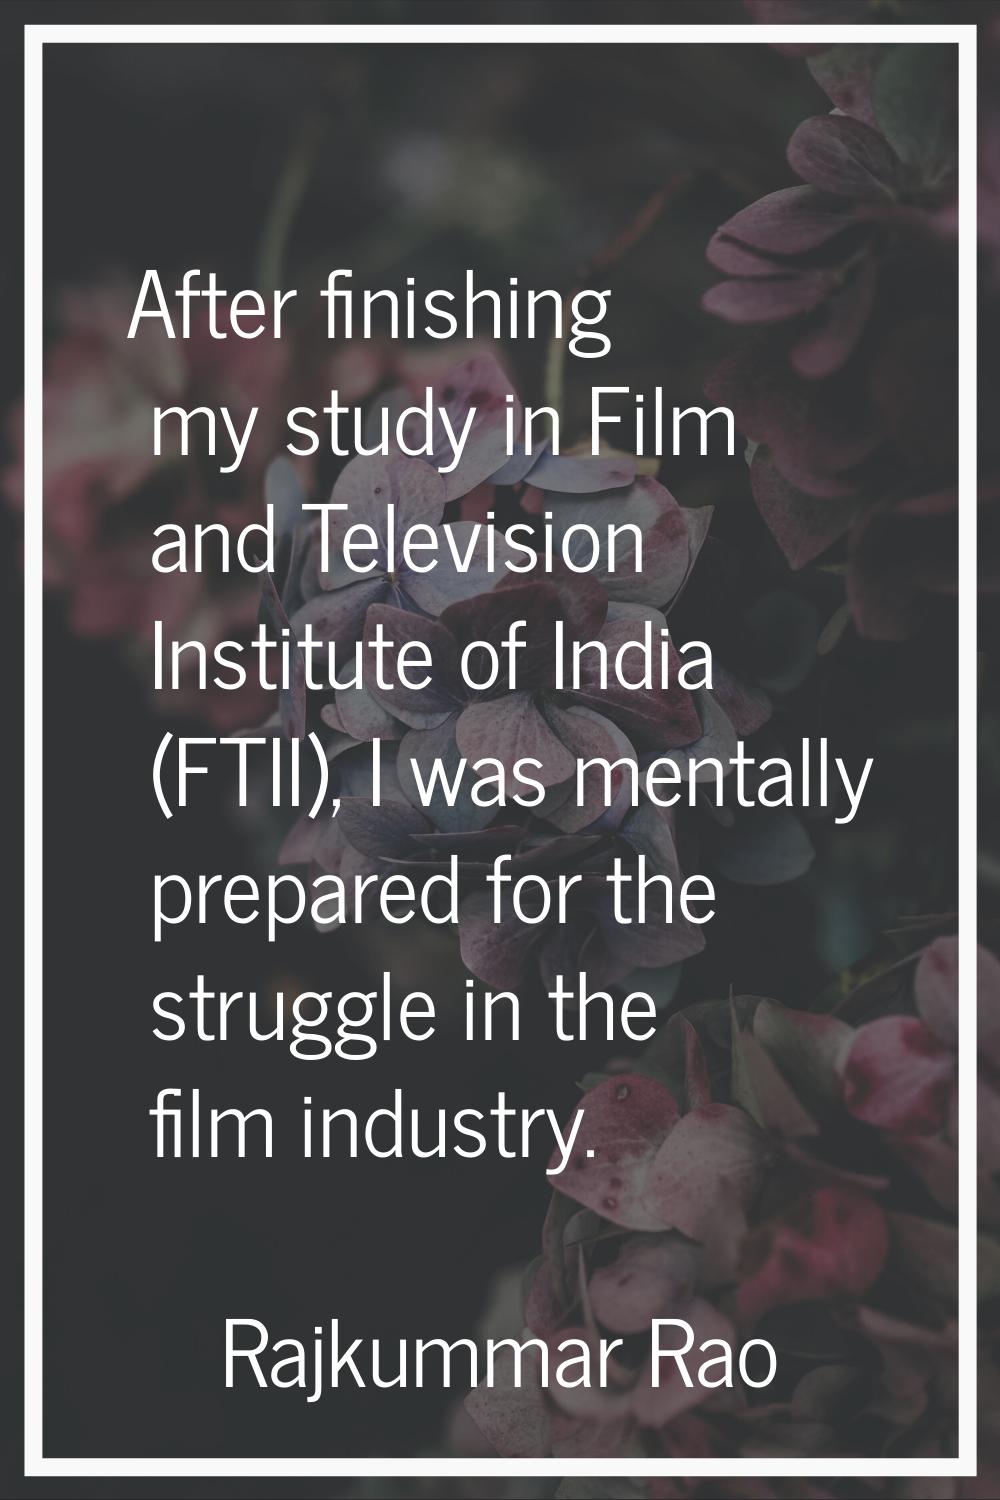 After finishing my study in Film and Television Institute of India (FTII), I was mentally prepared 